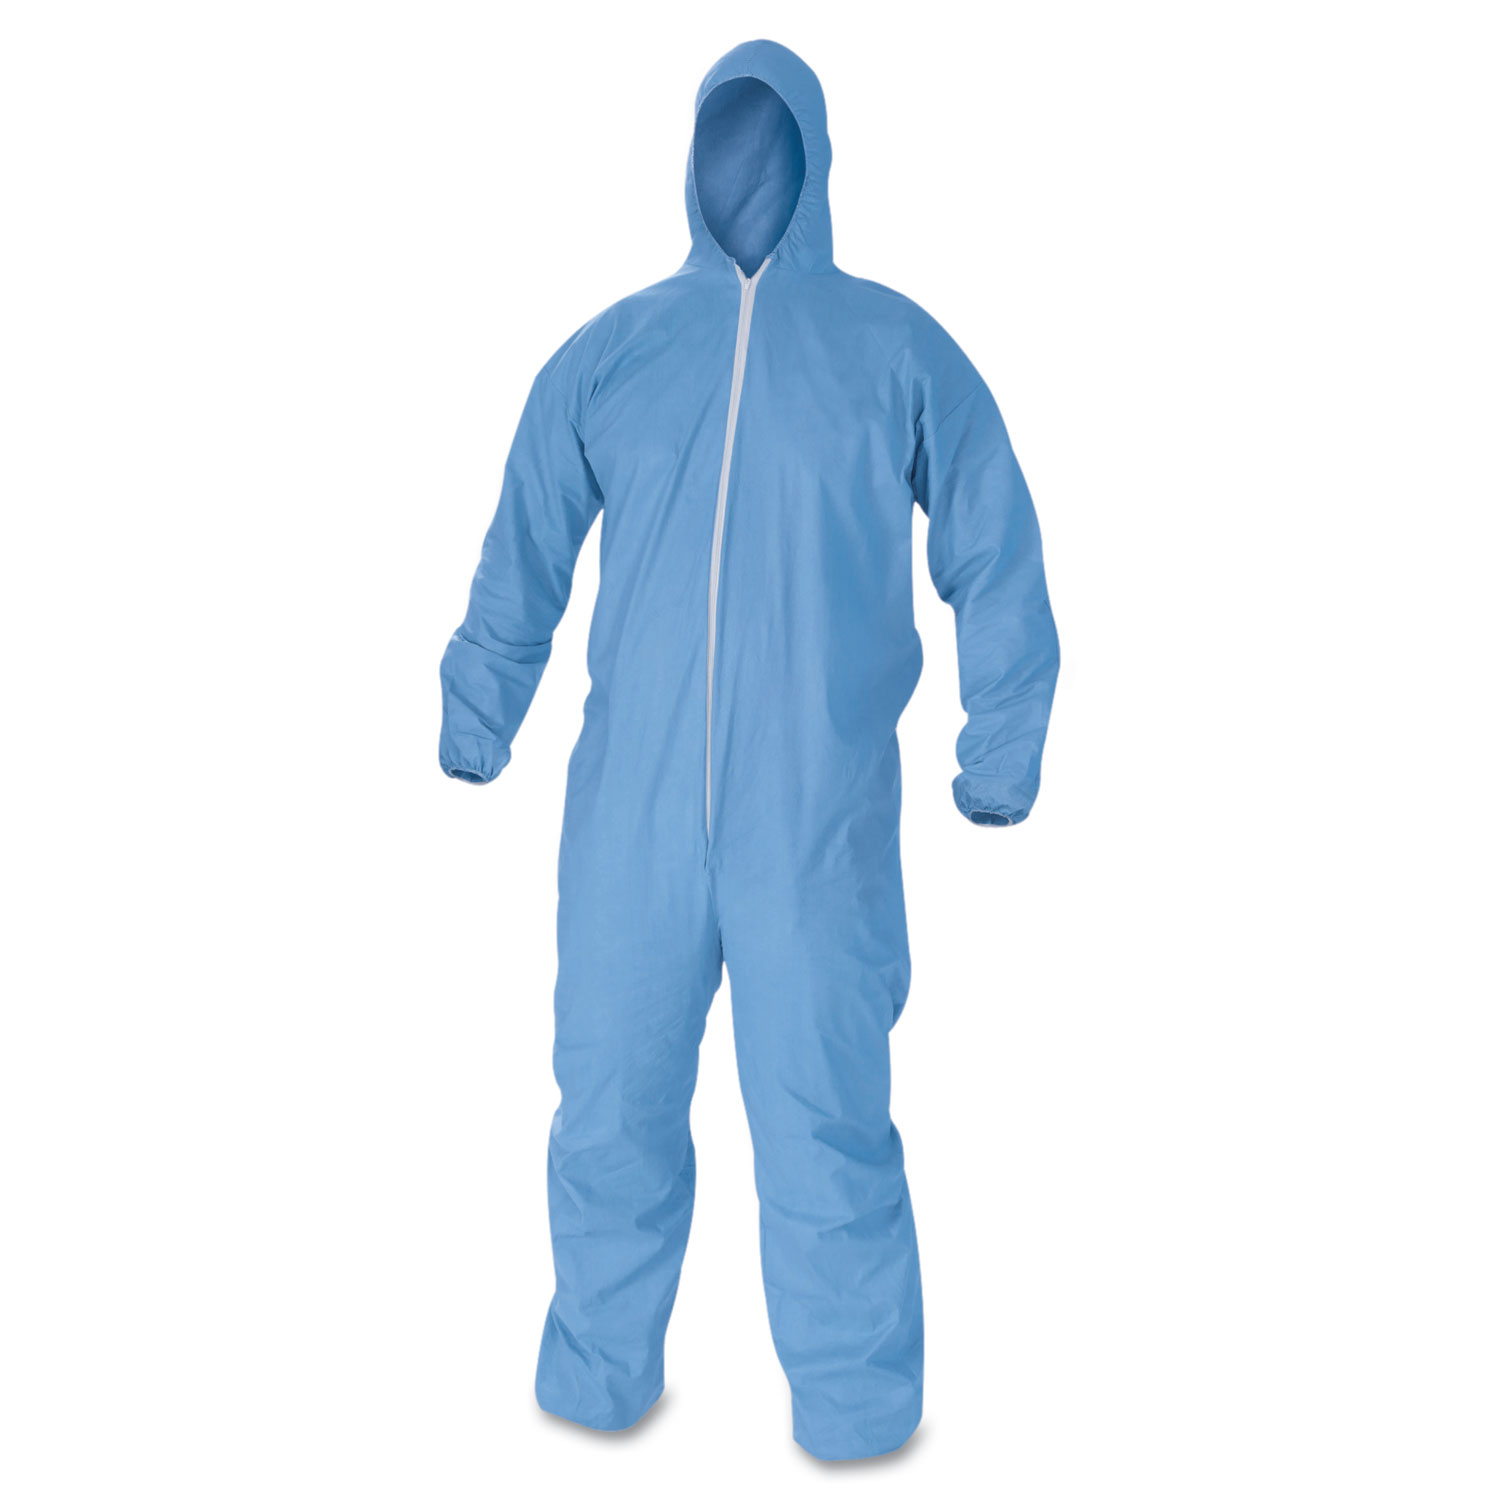 A60 Elastic-Cuff, Ankles & Back Hooded Coveralls, Blue, 2X-Large, 24/Case